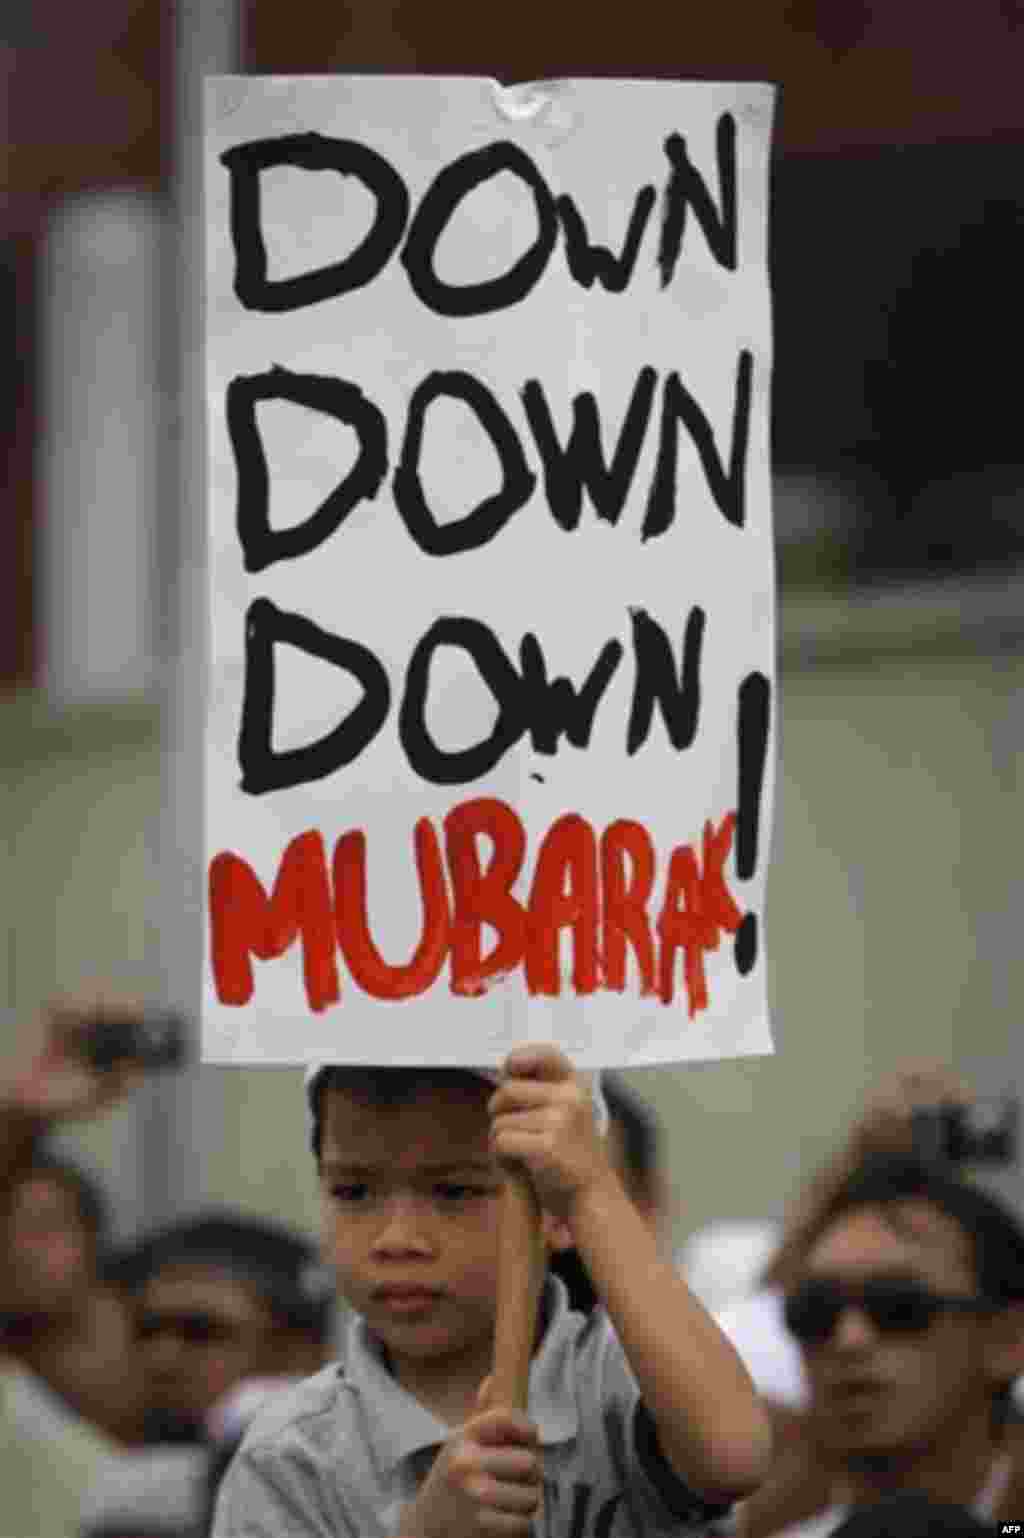 A child holds up a sign protesting against Egyptian President Hosni Mubarak during a rally in front of U.S. Embassy in Kuala Lumpur, Malaysia, Friday, Feb. 4, 2011. More than 1,000 people protested outside the embassy, calling for Mubarak to step down. (A